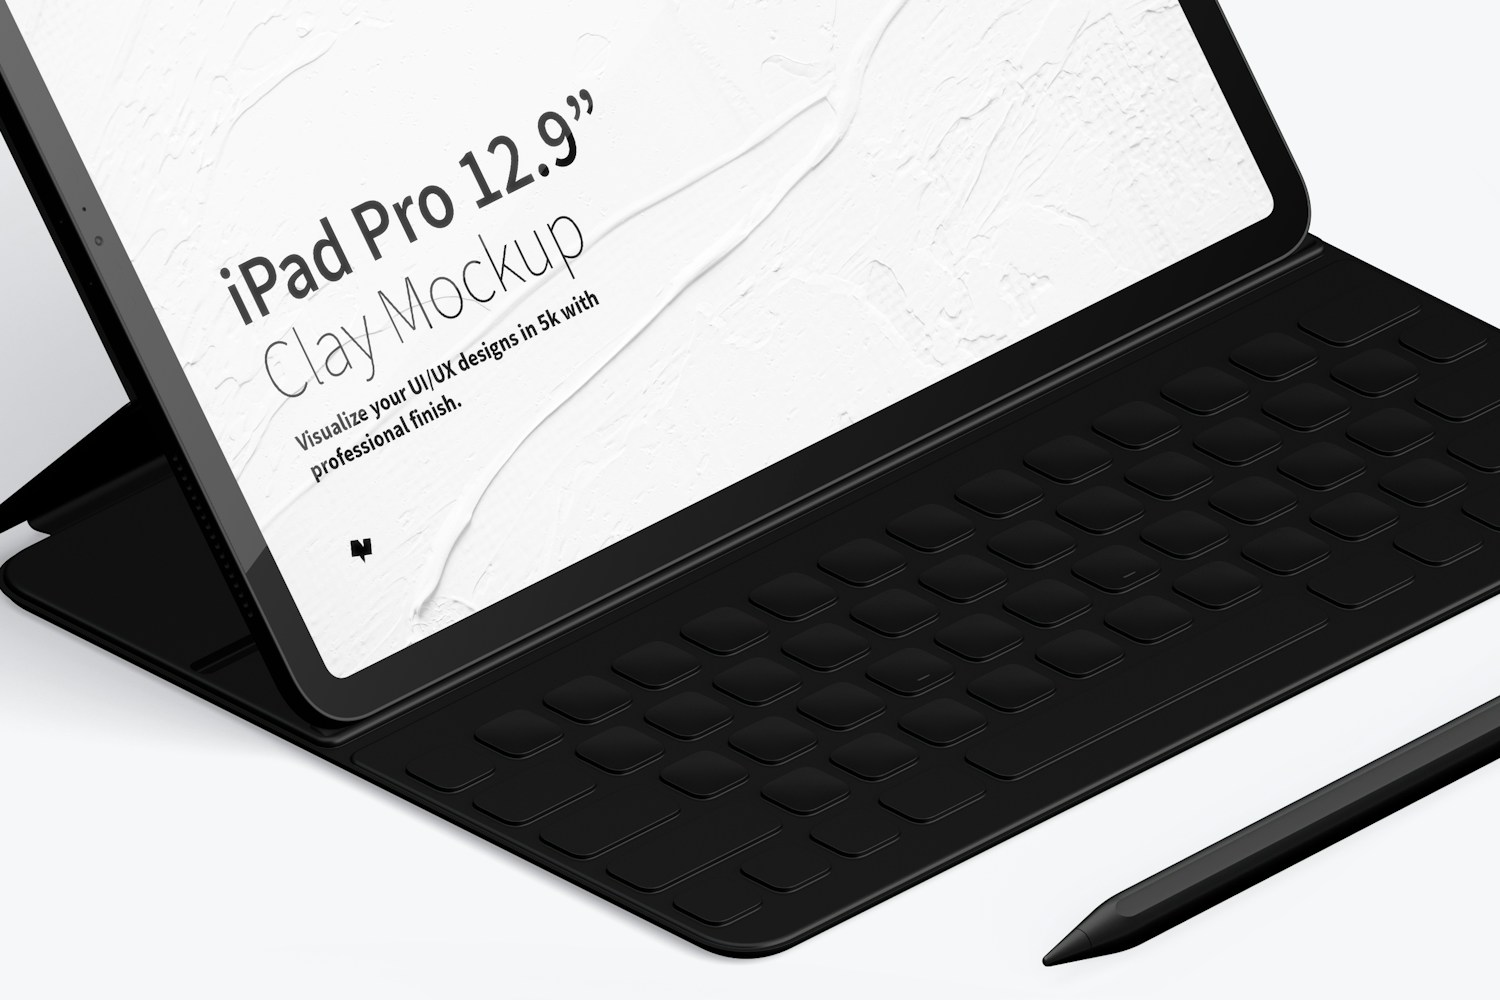 Clay iPad Pro 12.9” Mockup, Isometric Left View With Keyboard